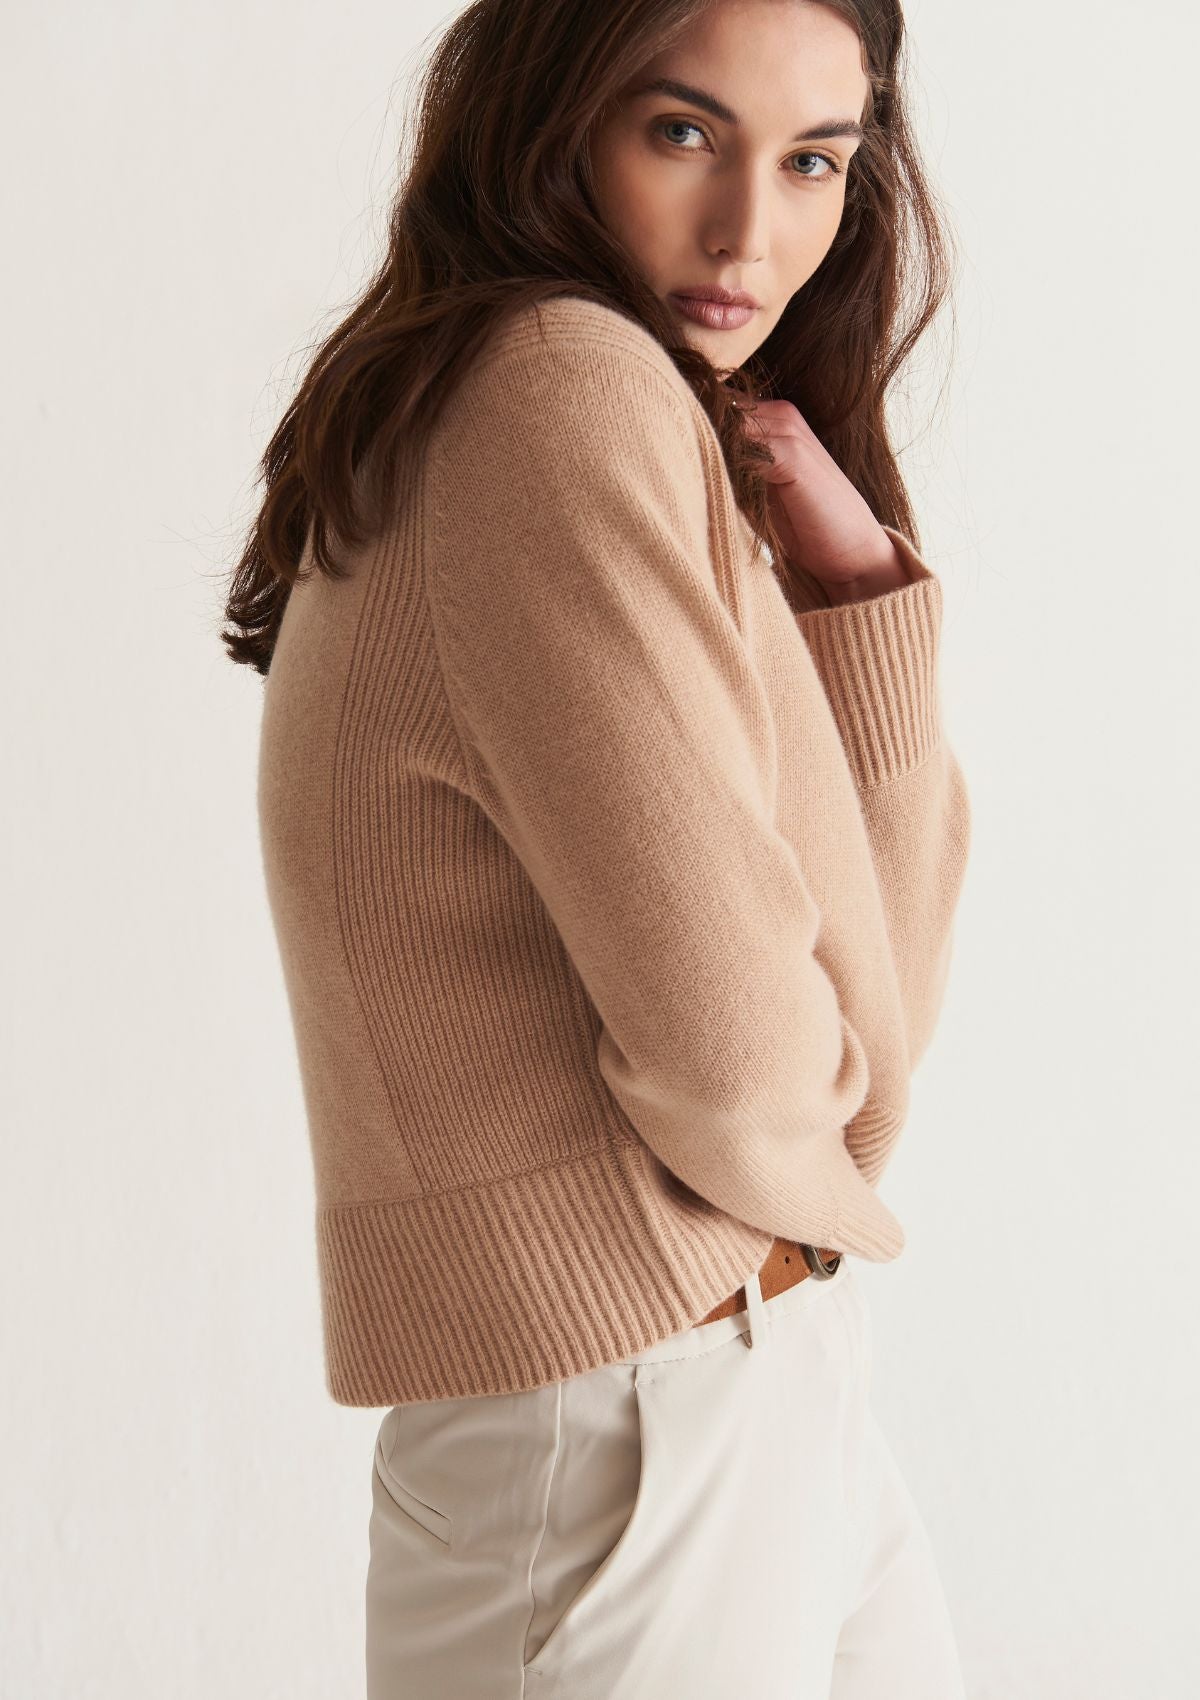 Cropped Cashmere Sweatshirt in Toffee